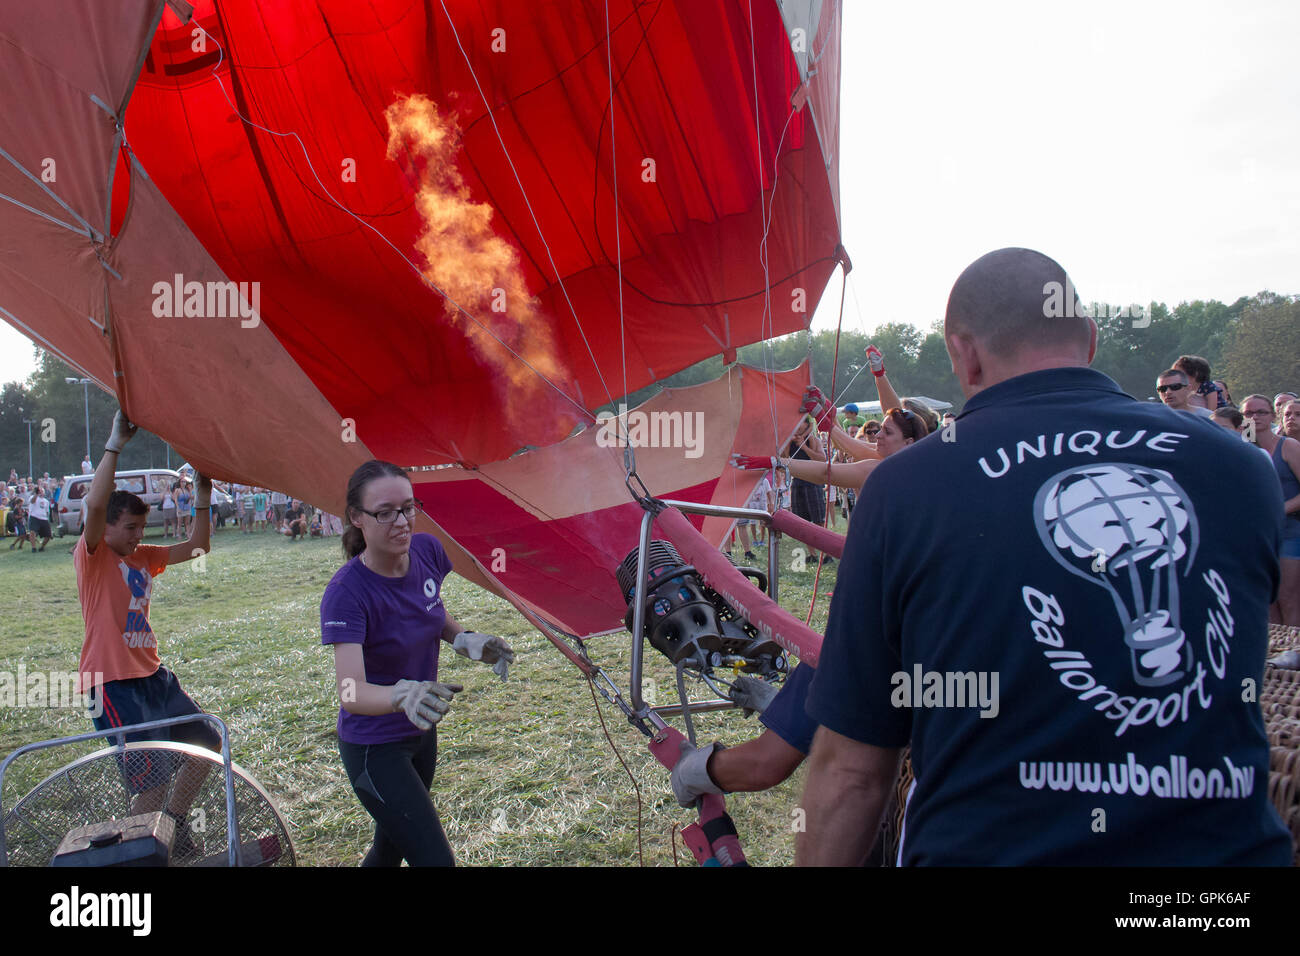 Agard, Hungary. 3rd Sep, 2016. Participants prepare for takeoff during the 22nd Lake Velence International Hot Air Balloon Carnival in Agard, Fejer, Hungary, Sept. 3, 2016. © Attila Volgy/Xinhua/Alamy Live News Stock Photo